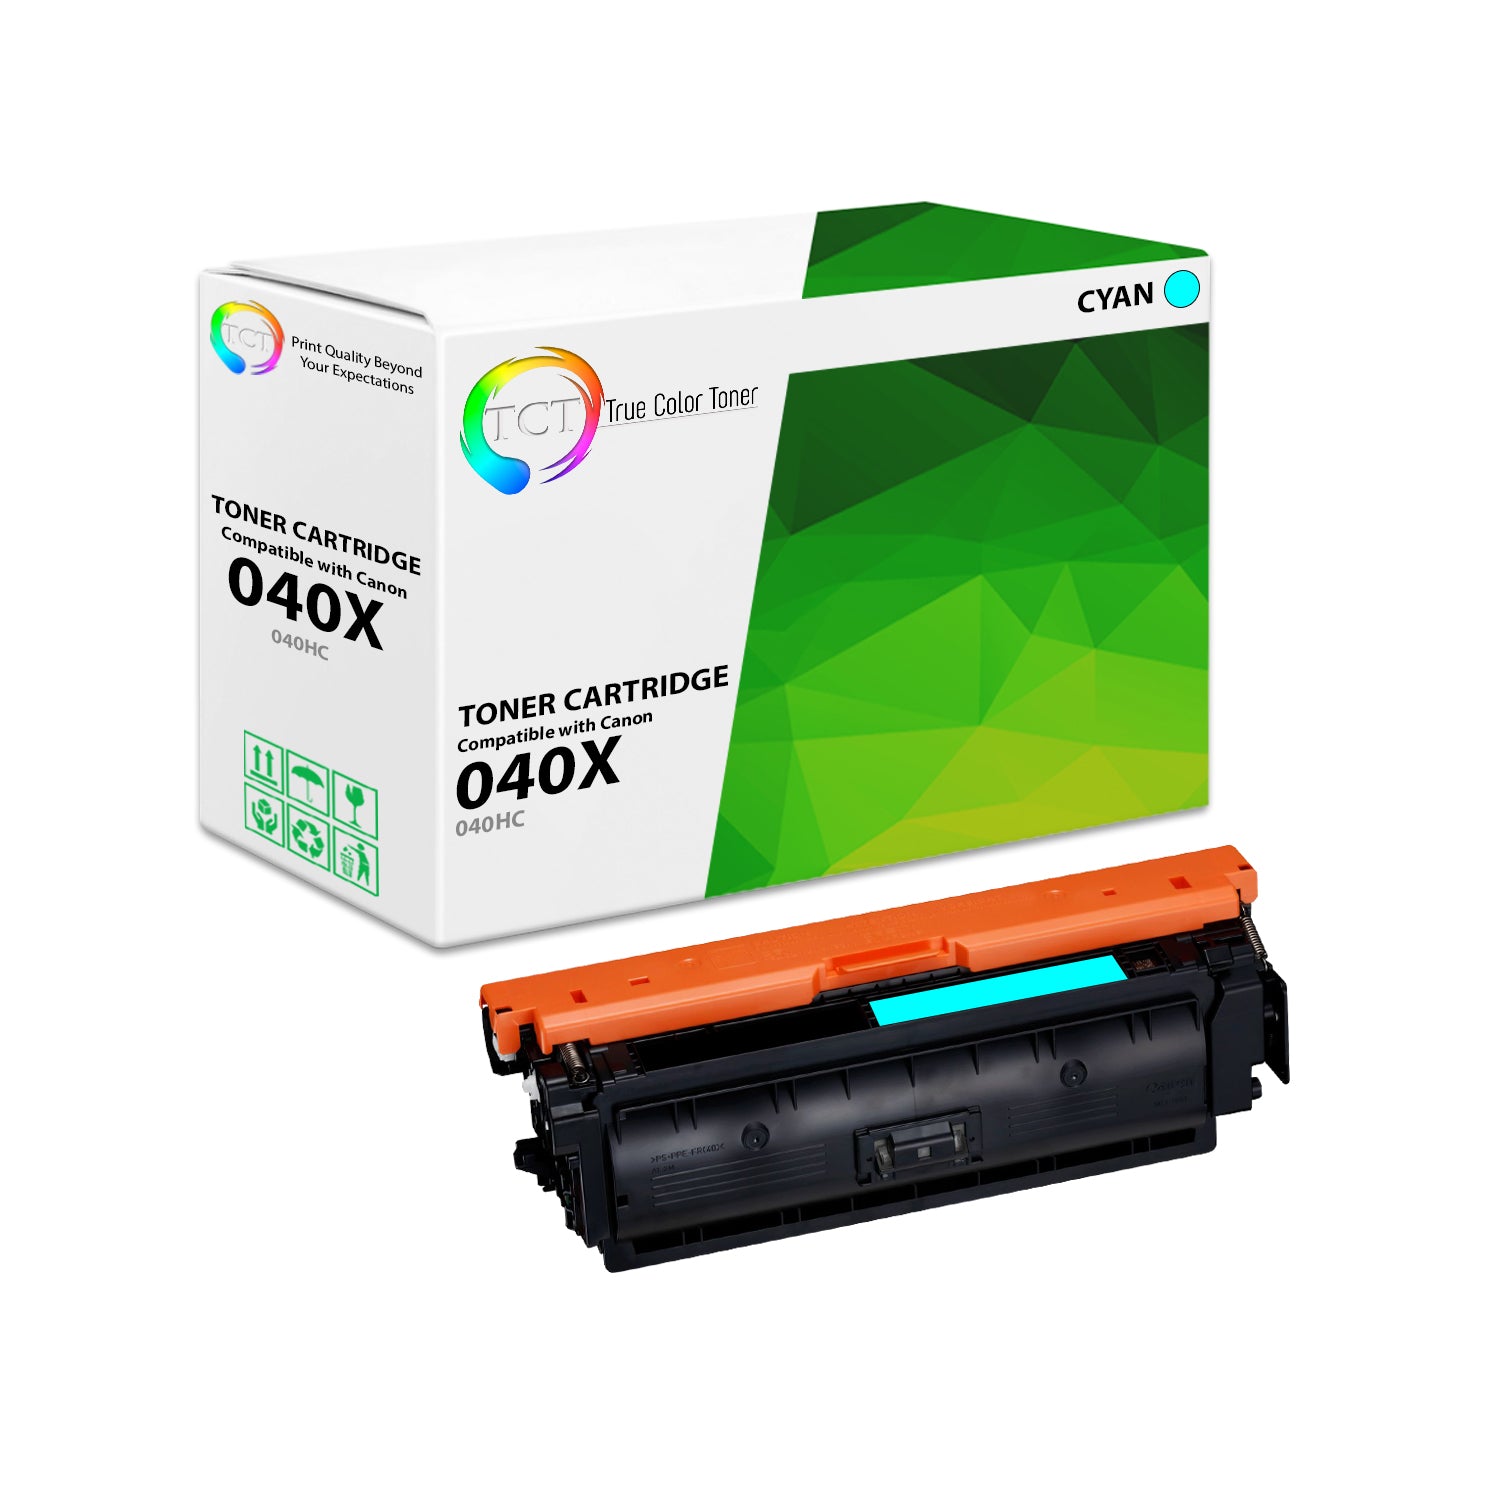 TCT Compatible High Yield Toner Cartridge Replacement for the Canon 040 Series - 1 Pack Cyan